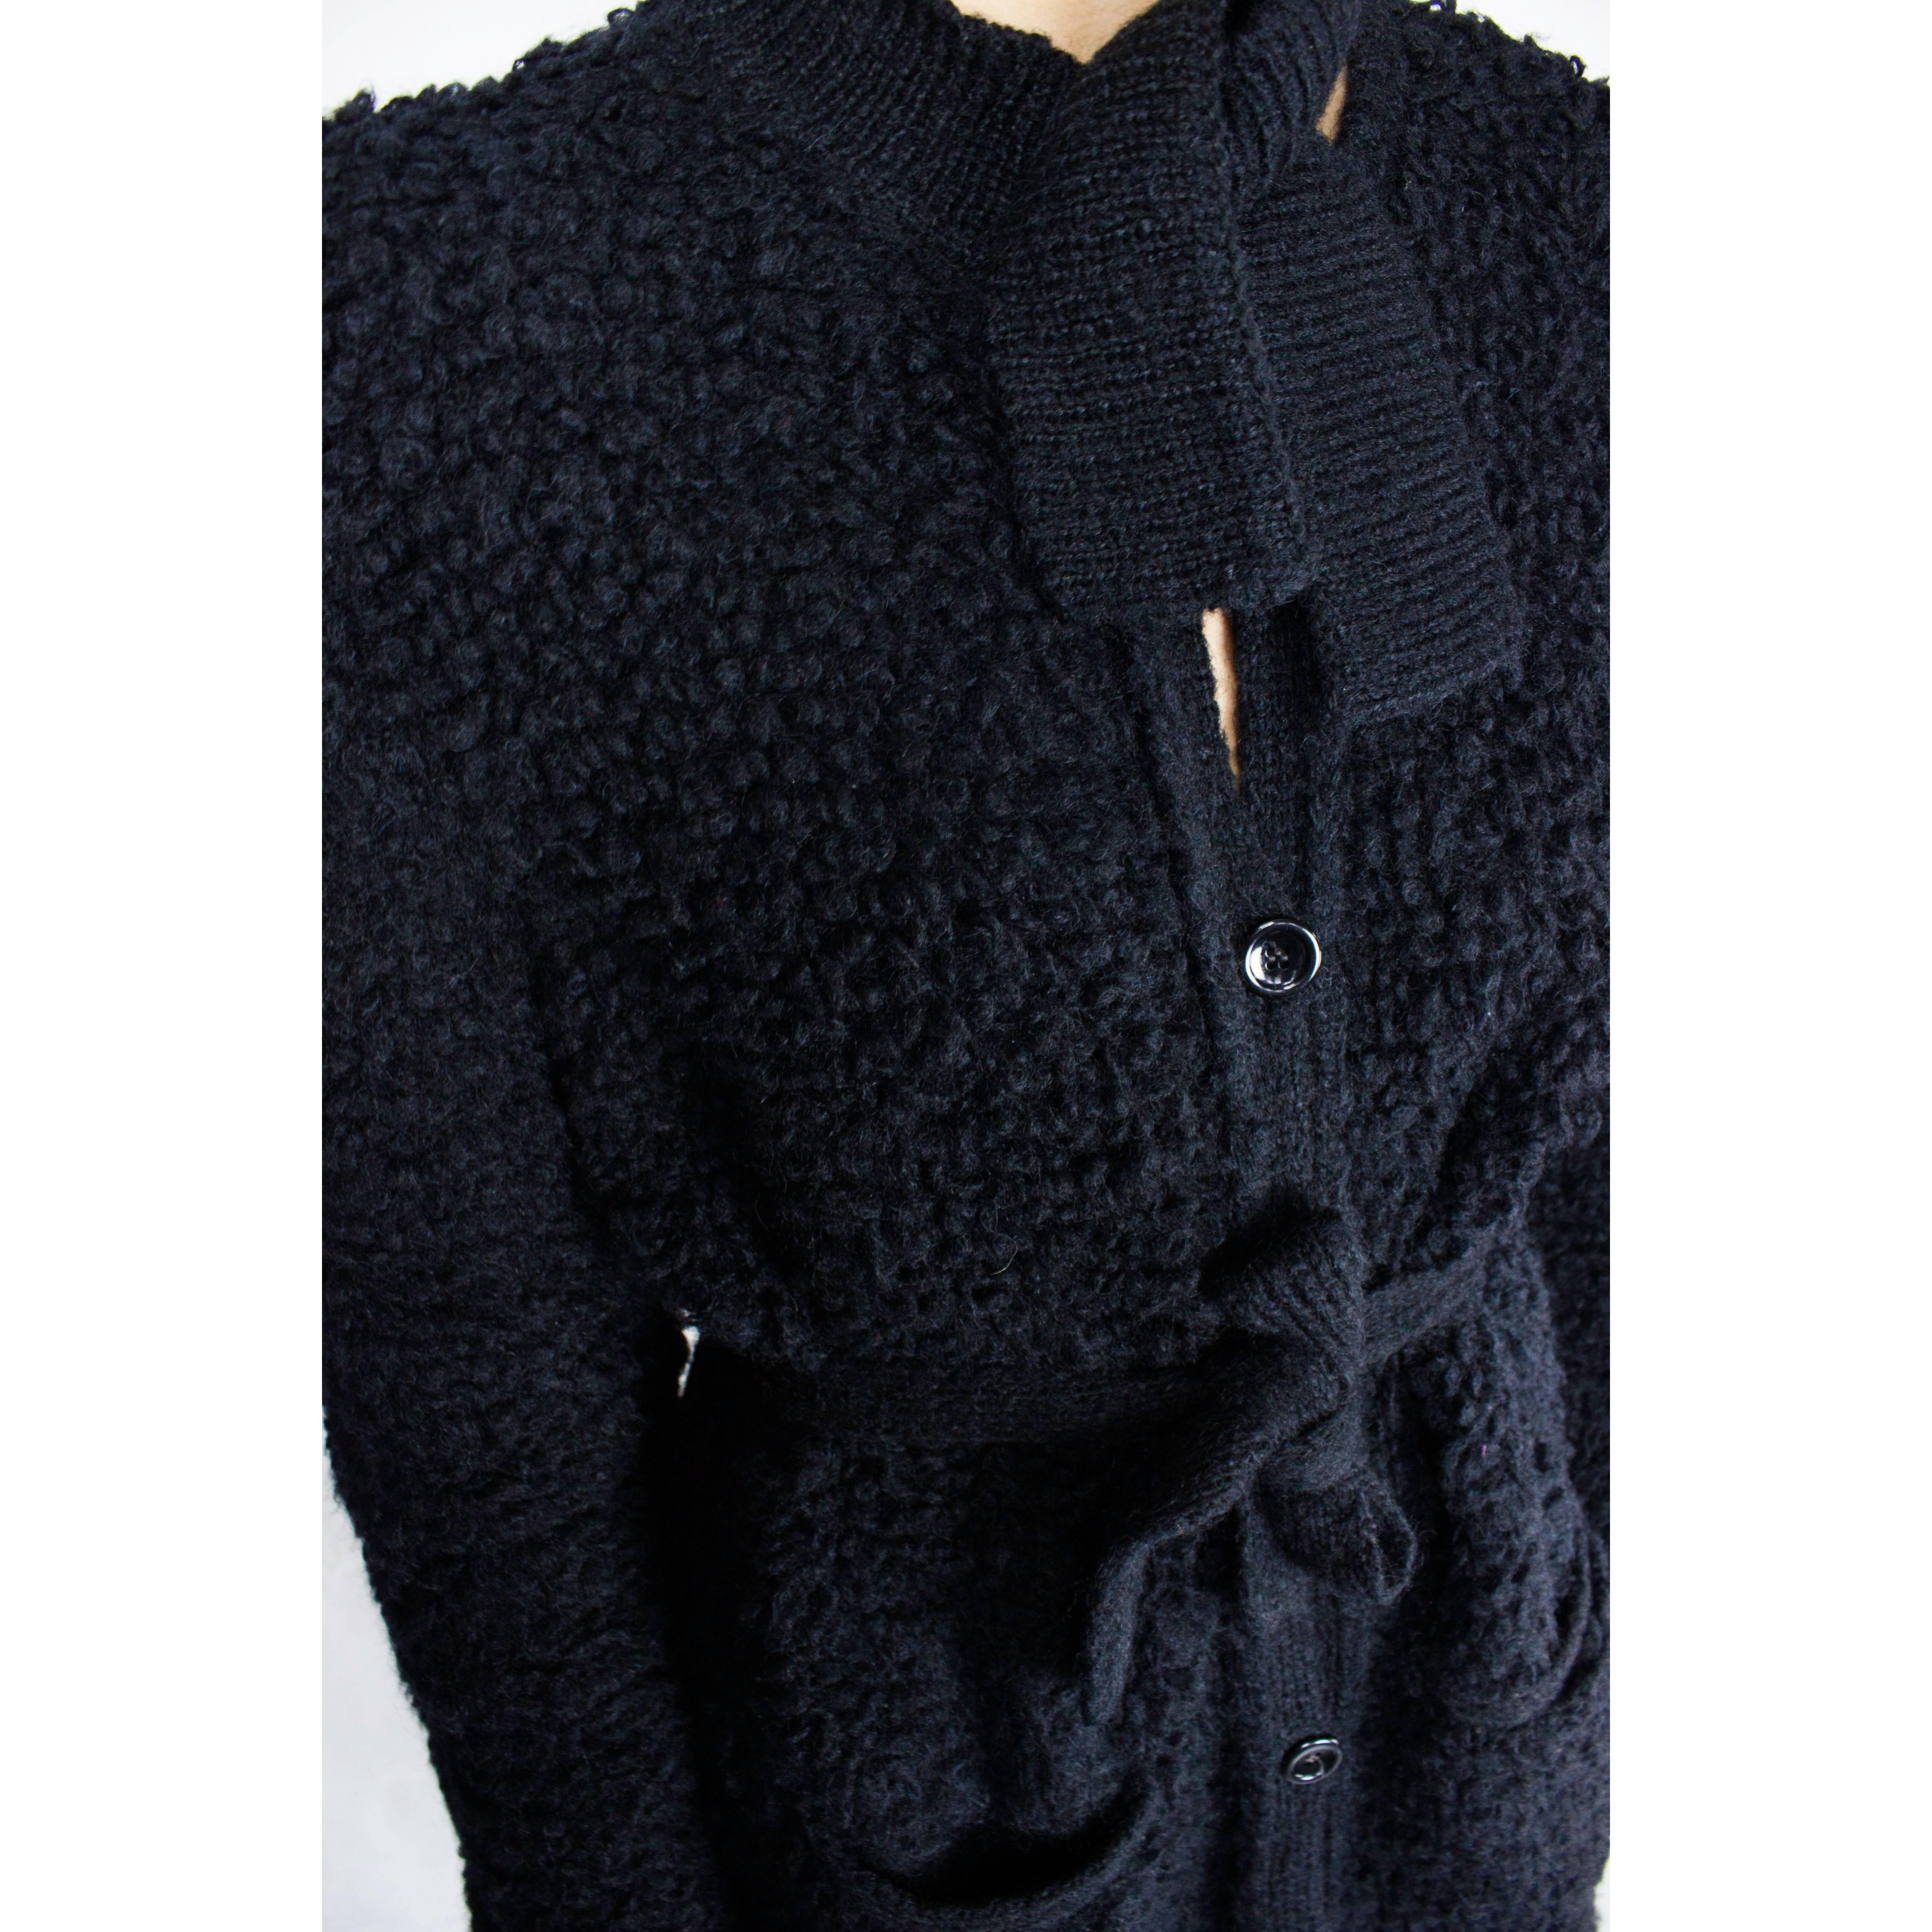  Sonia Rykiel  quintessentially French black knitted wool coat, circa 1960s For Sale 1